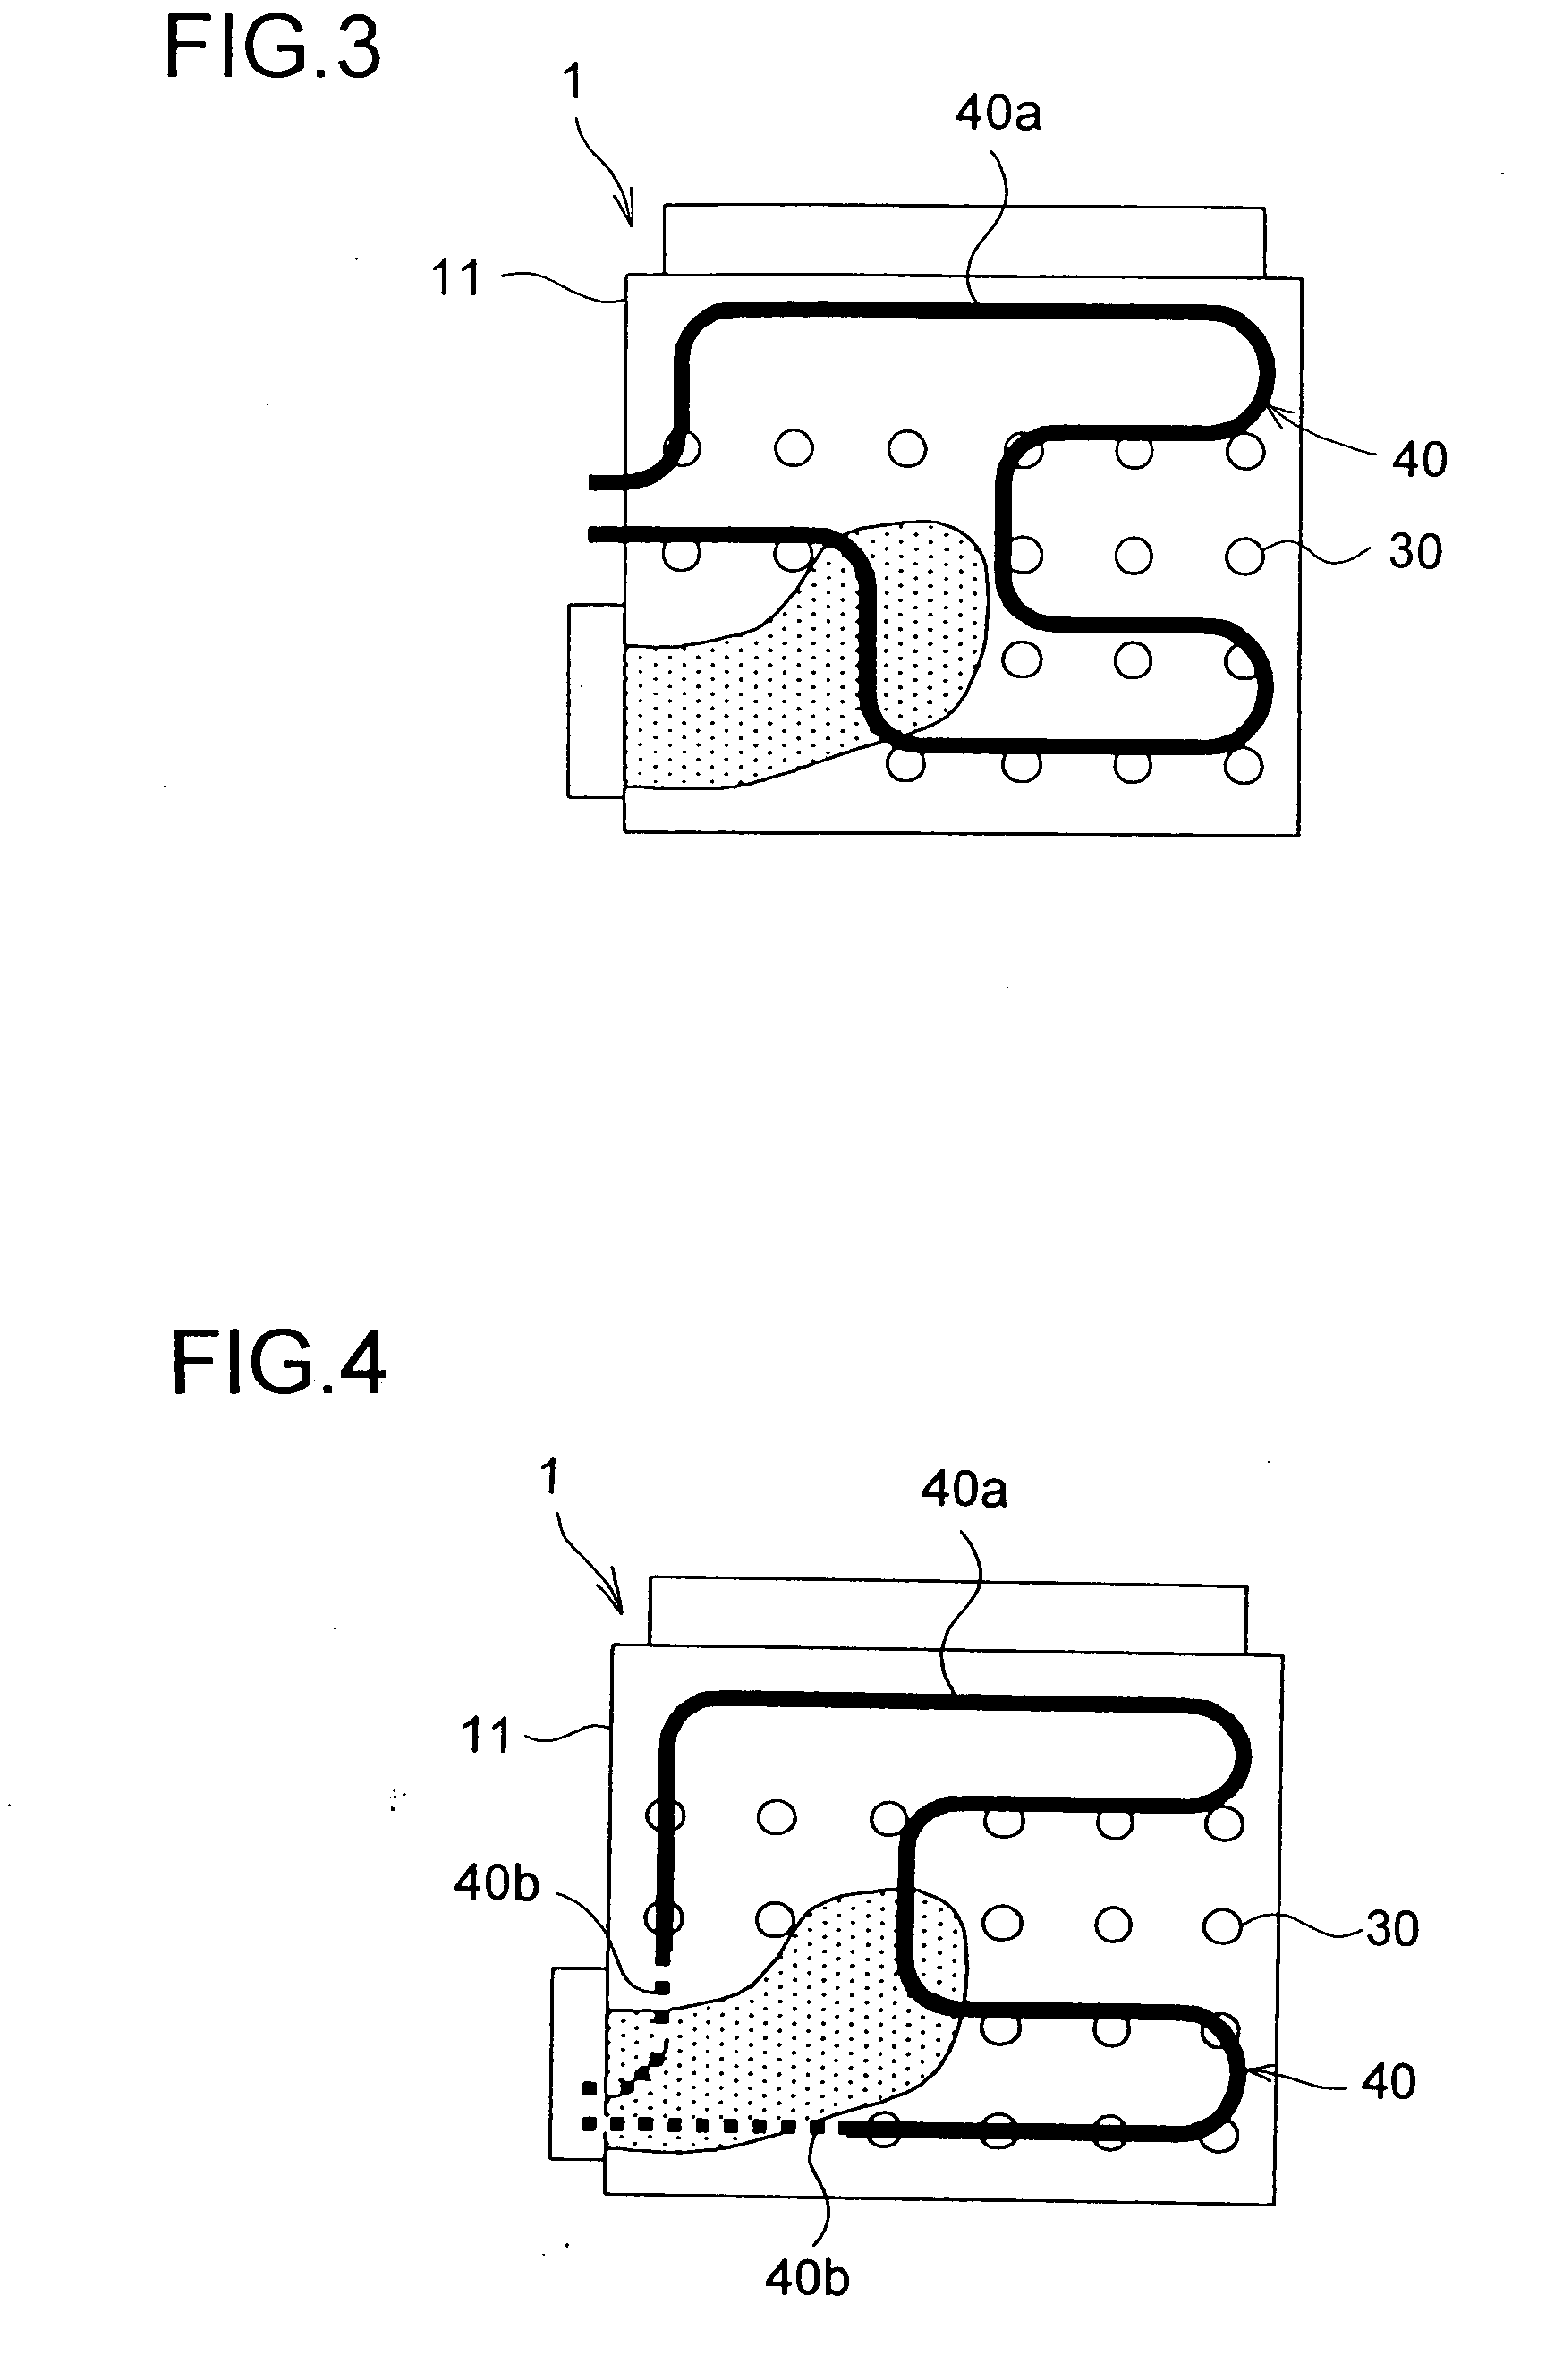 Heating cooking device